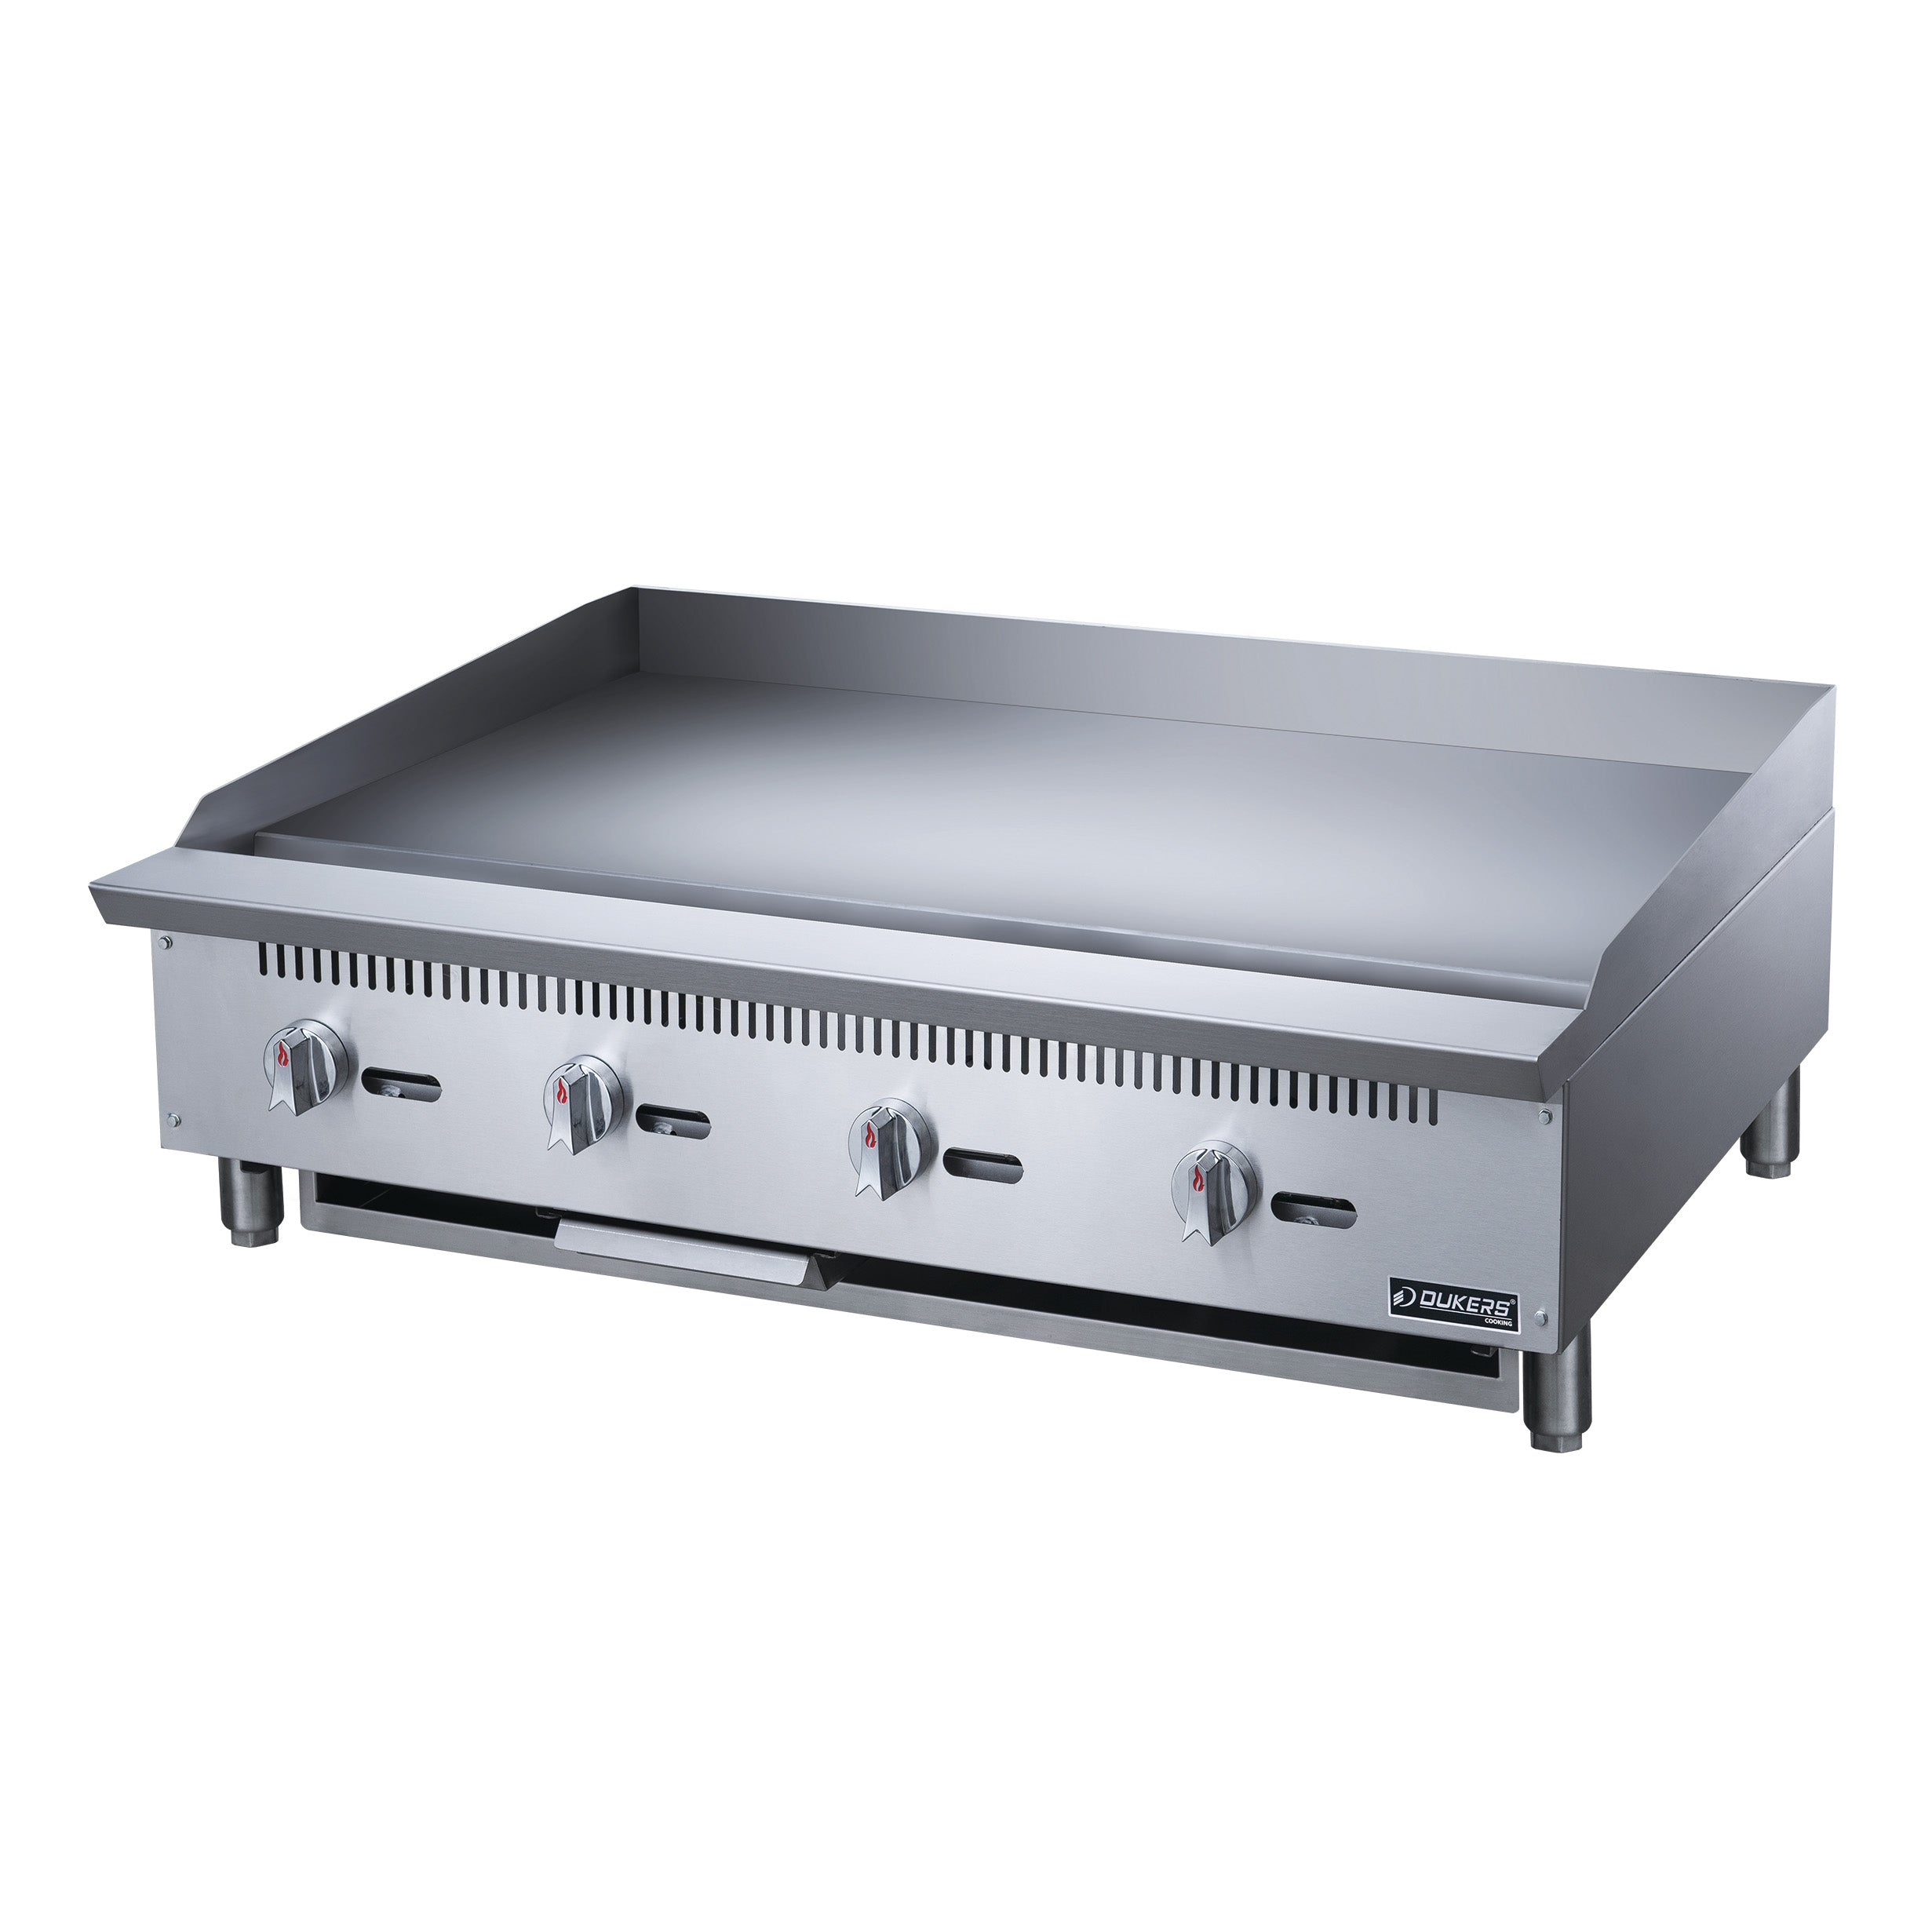 Dukers - DCGM48, Commercial 48" Griddle with 4 Burners